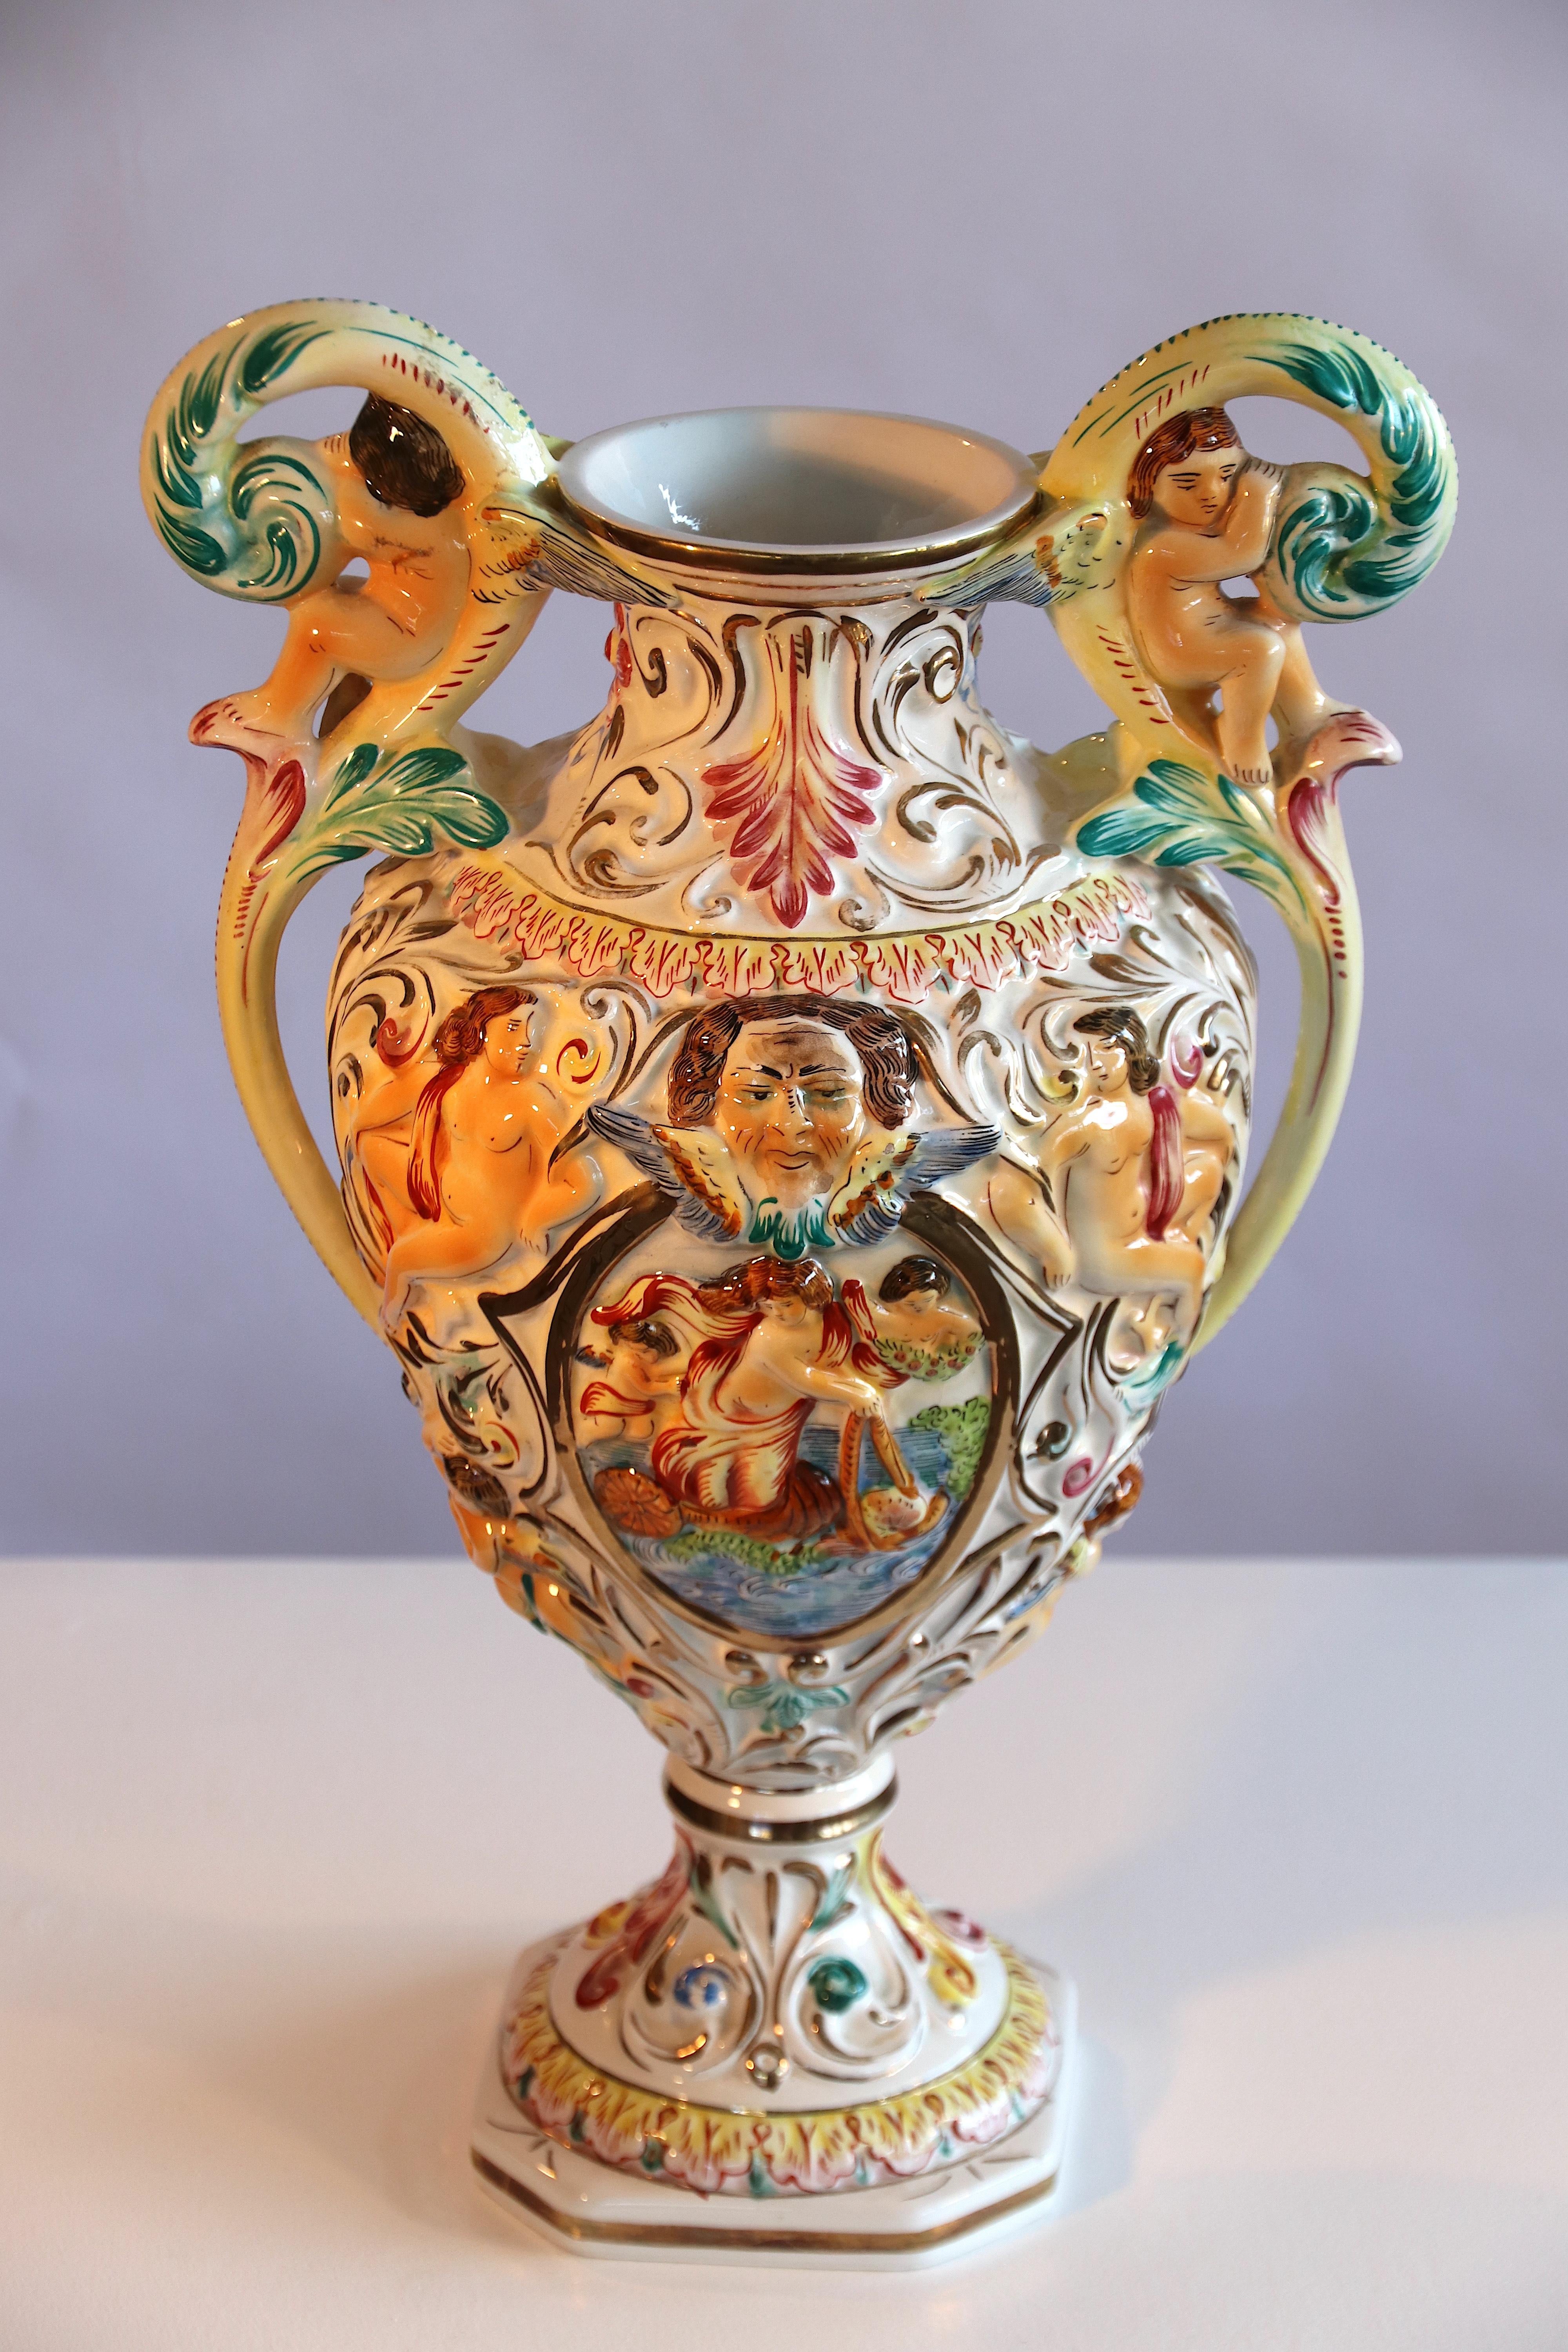 Stunning ornamental raised-relief Rococo style amphora vase with two handles by Capodimonte Naples, Italy, signed on the bottom with the original R. Capodimonte stamp. The vase features 2 cherubs in the handles and several faces, Roman mythology